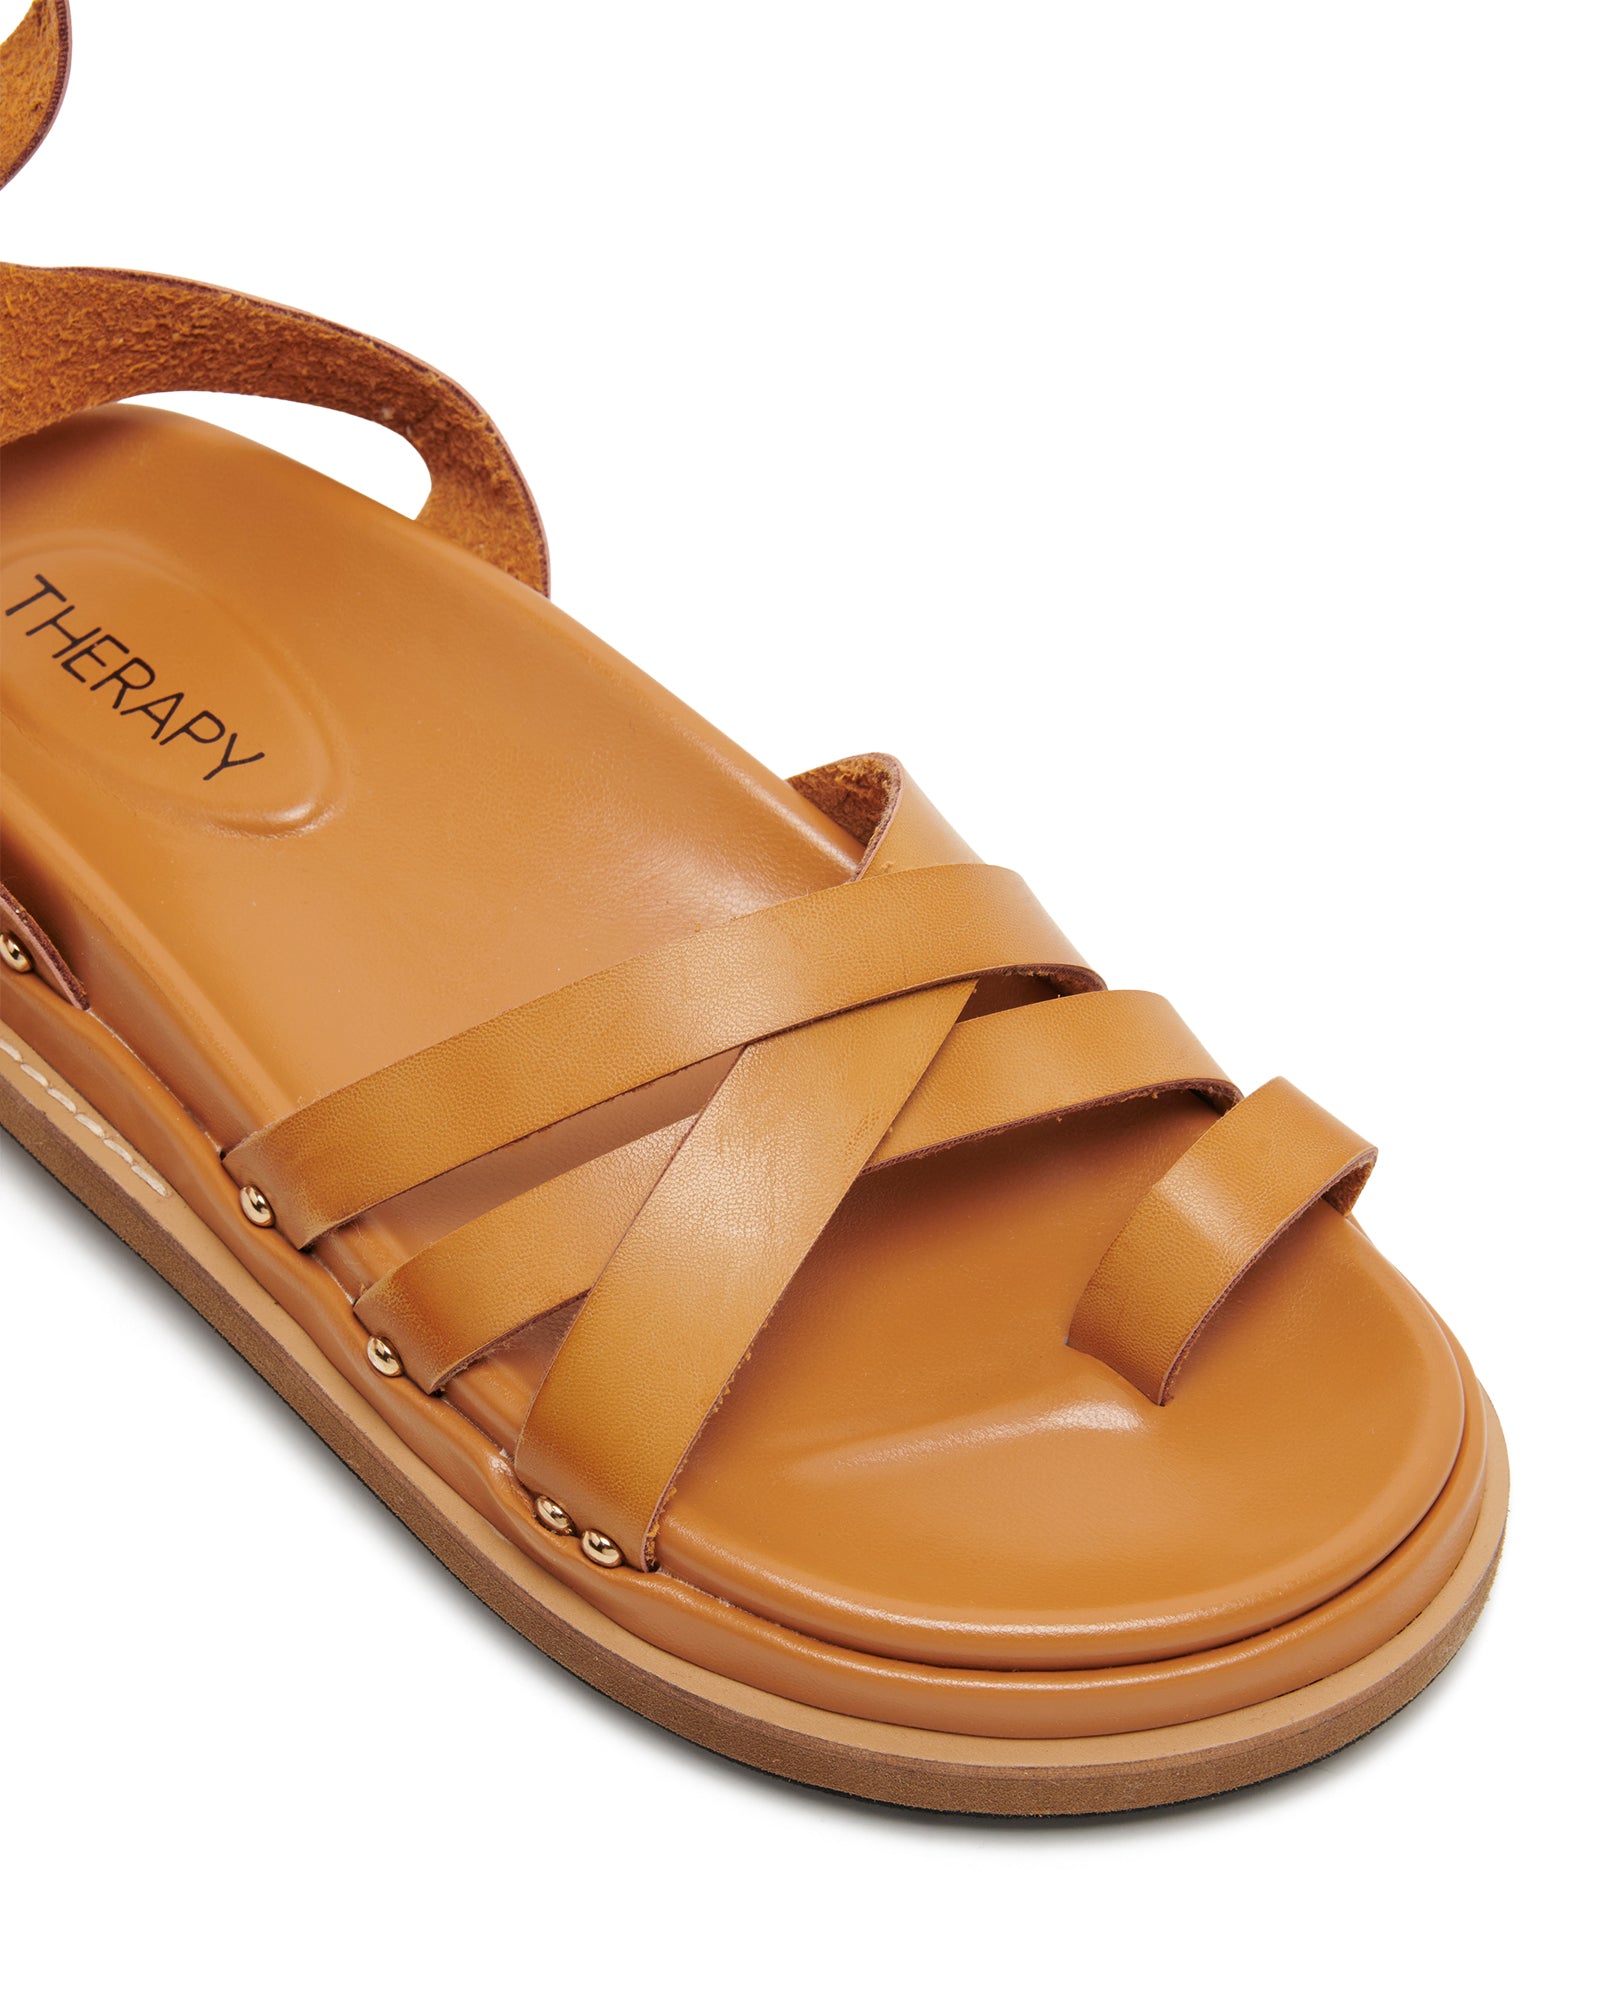 Therapy Shoes Coco Caramel | Women's Sandals | Flatform | Chunky | Footbed